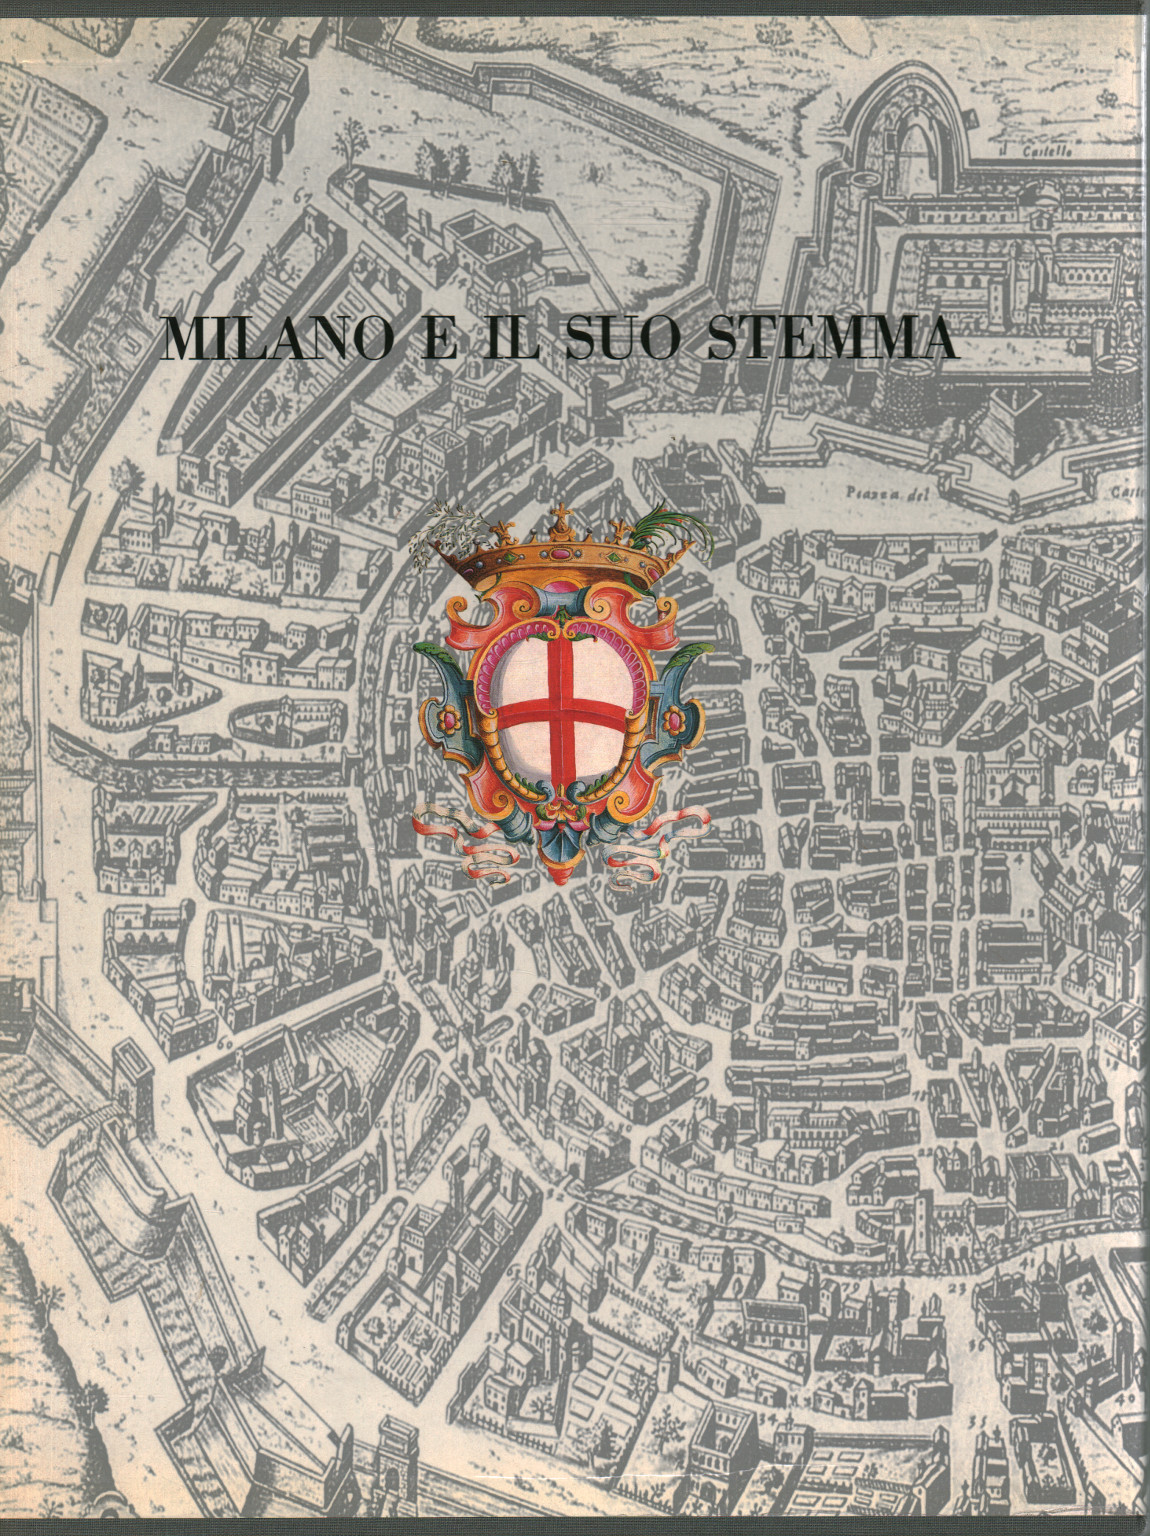 Milan and its coat of arms, s.a.